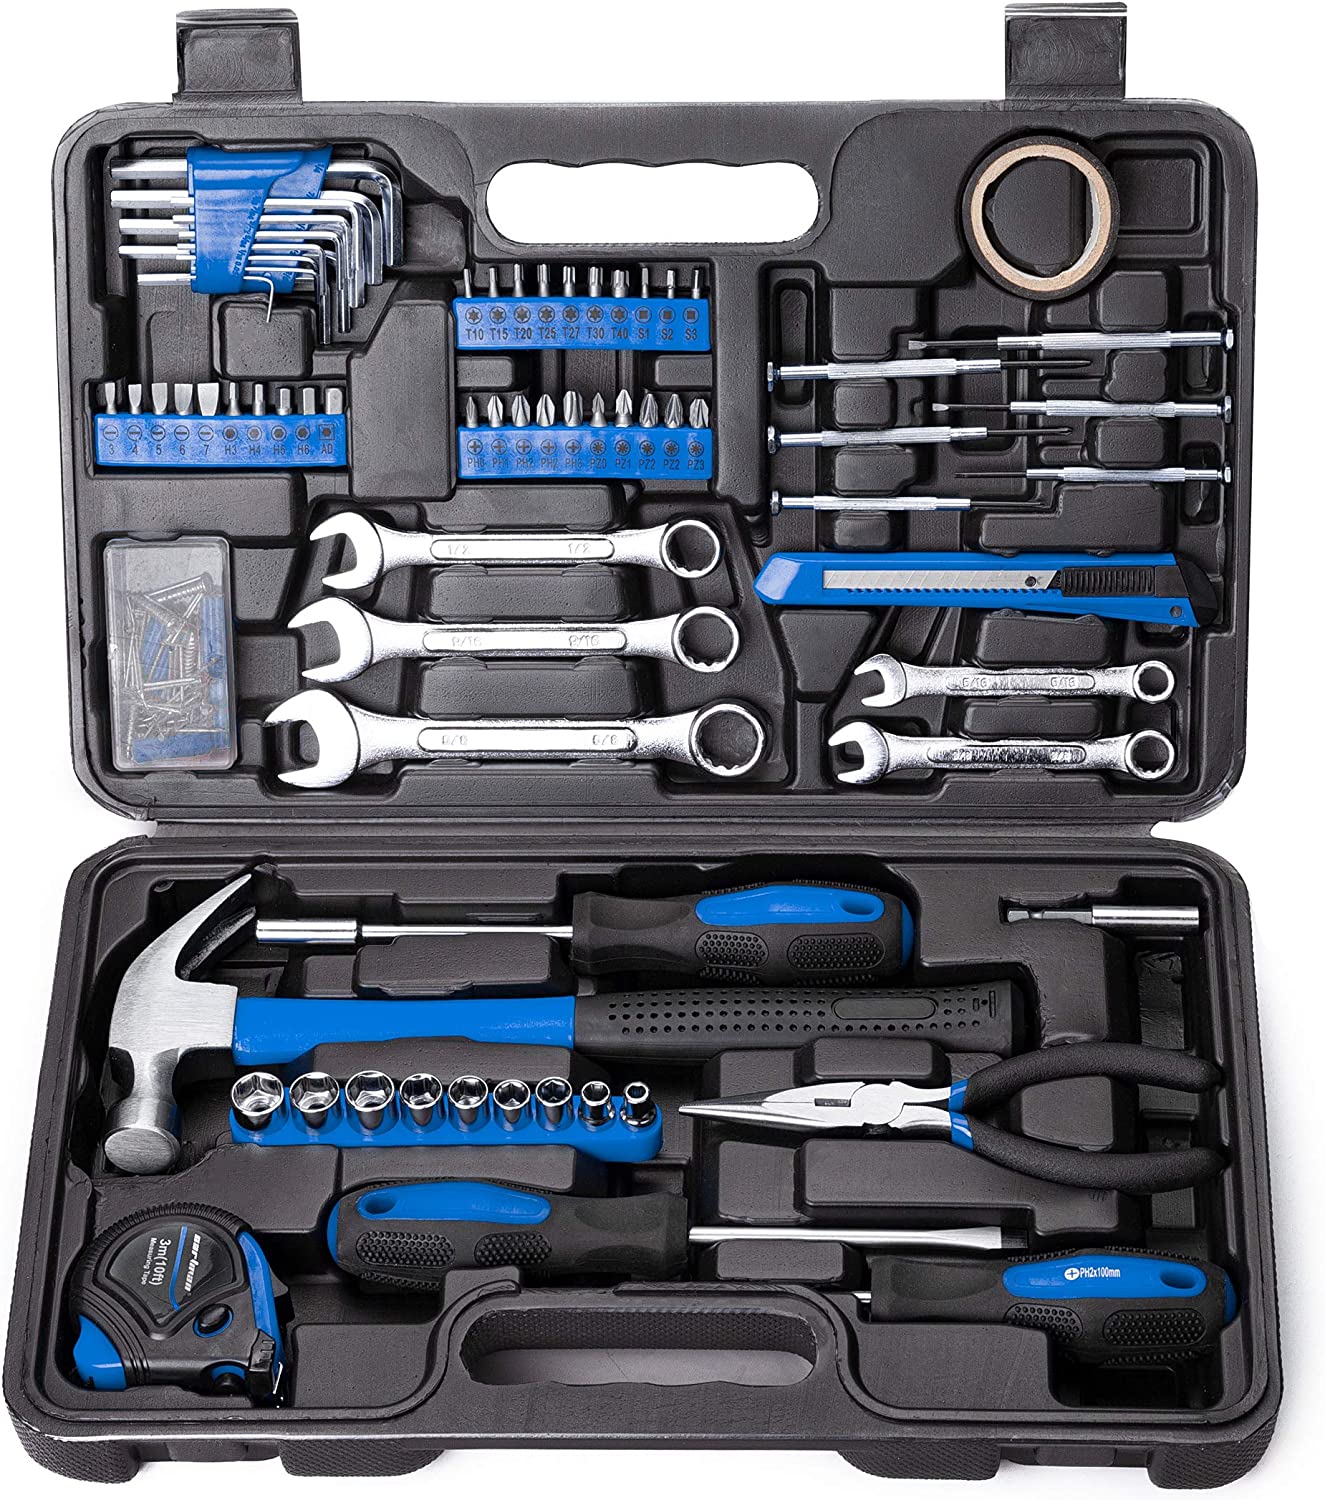 CARTMAN 148Piece Tool Set General Household Hand Tool Kit with Plastic Toolbox Storage Case Blue…